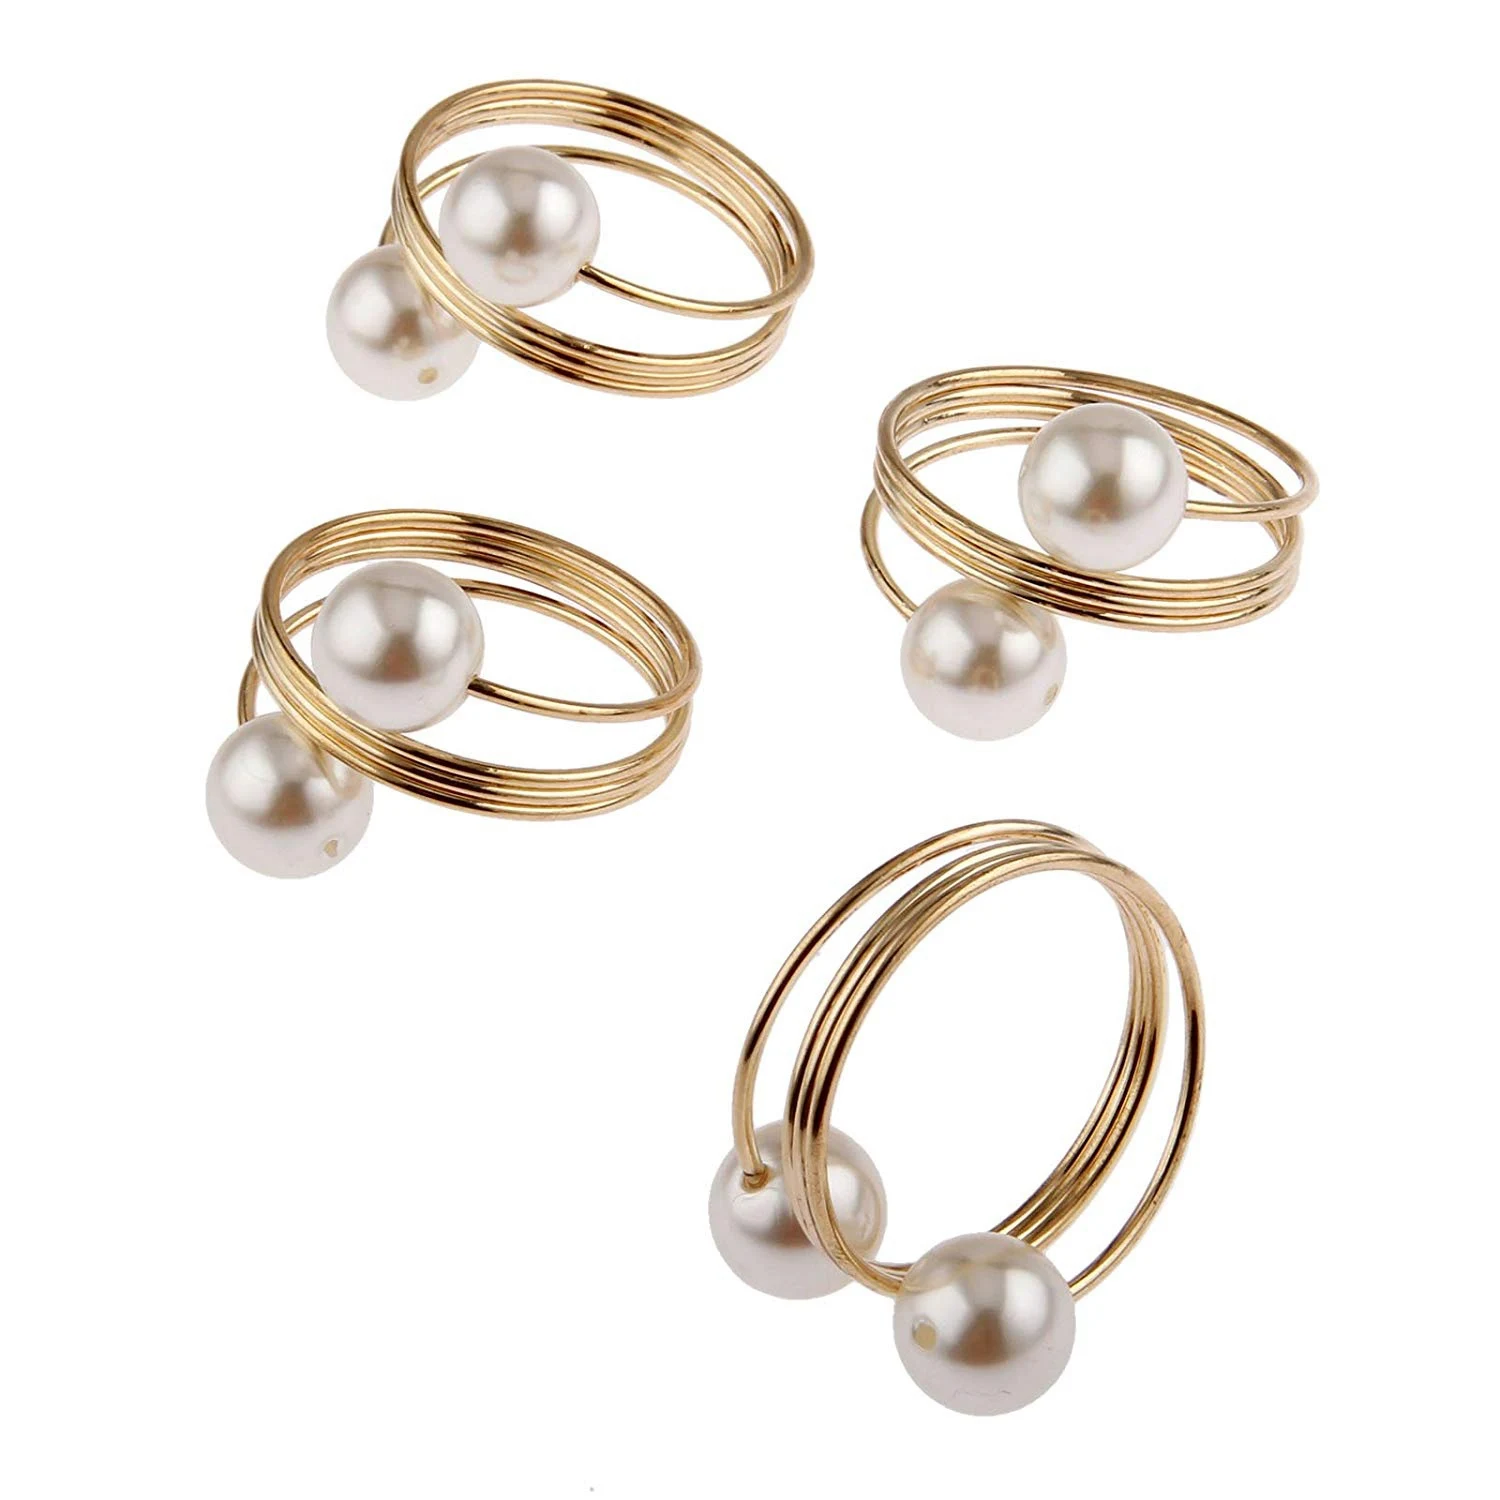 

12Pcs Pearl Napkin Buckle Hoop Napkin Rings Circle Serviette Holder for Wedding Hotel Supplies Table Decoration Gold